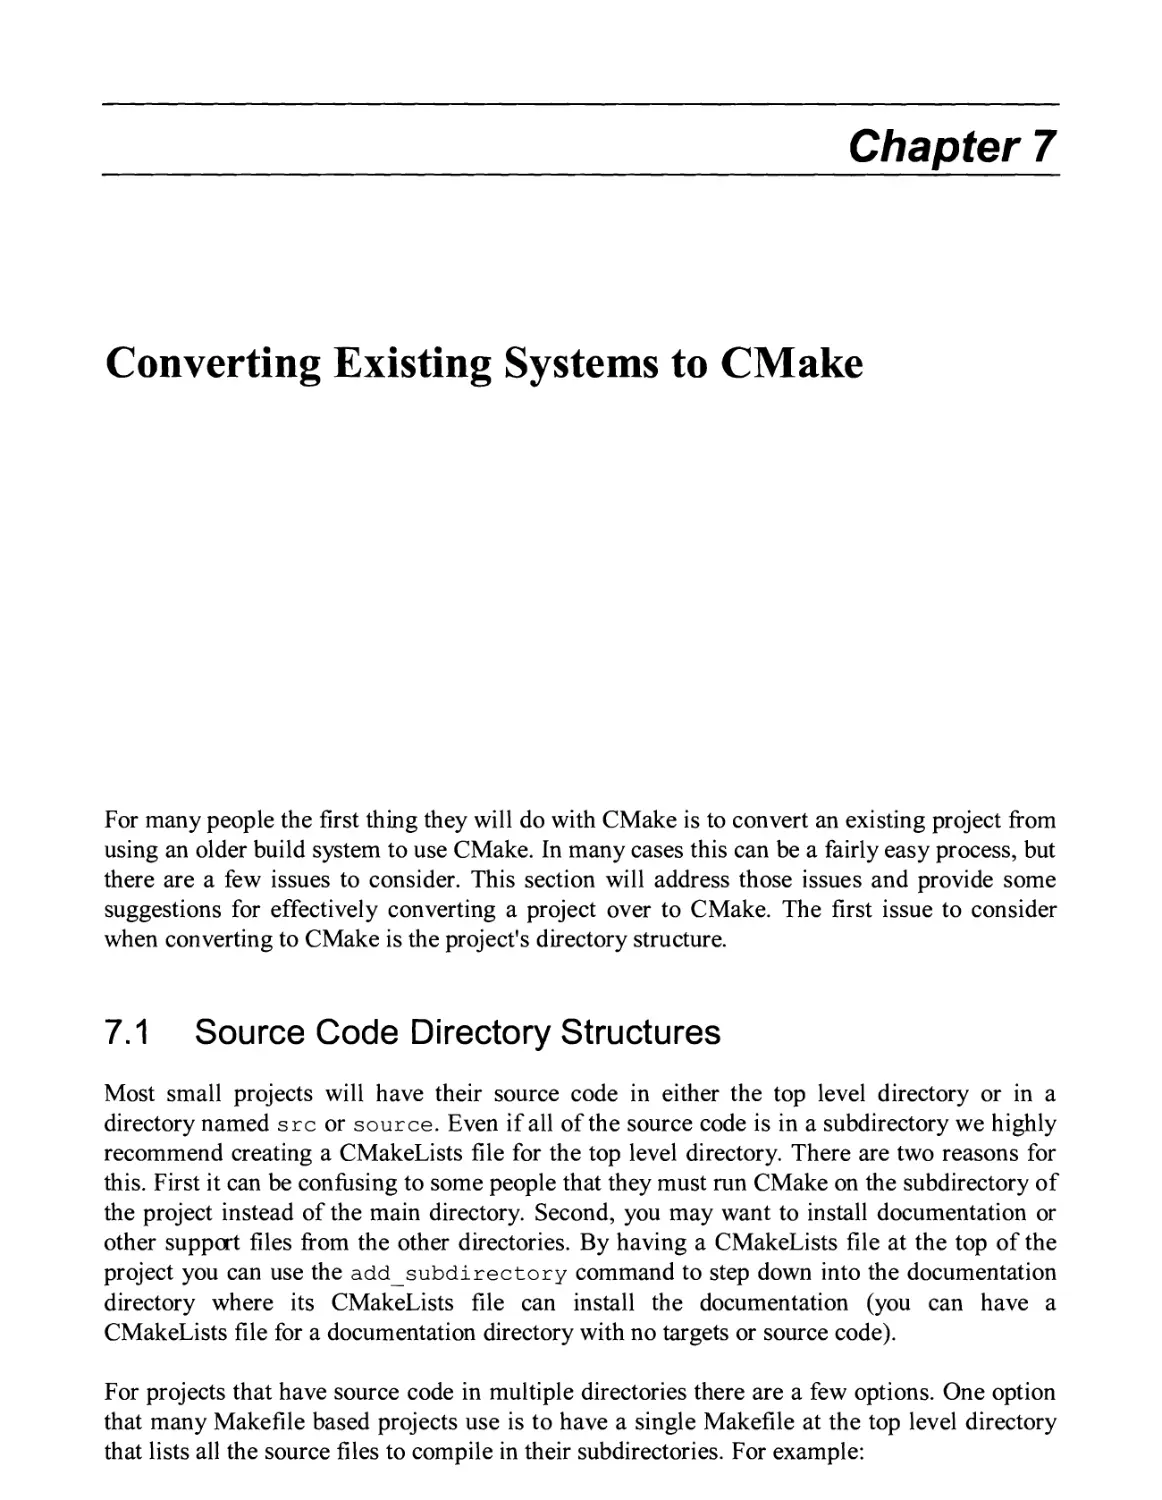 7. CONVERTING EXISTING SYSTEMS TO CMAKE